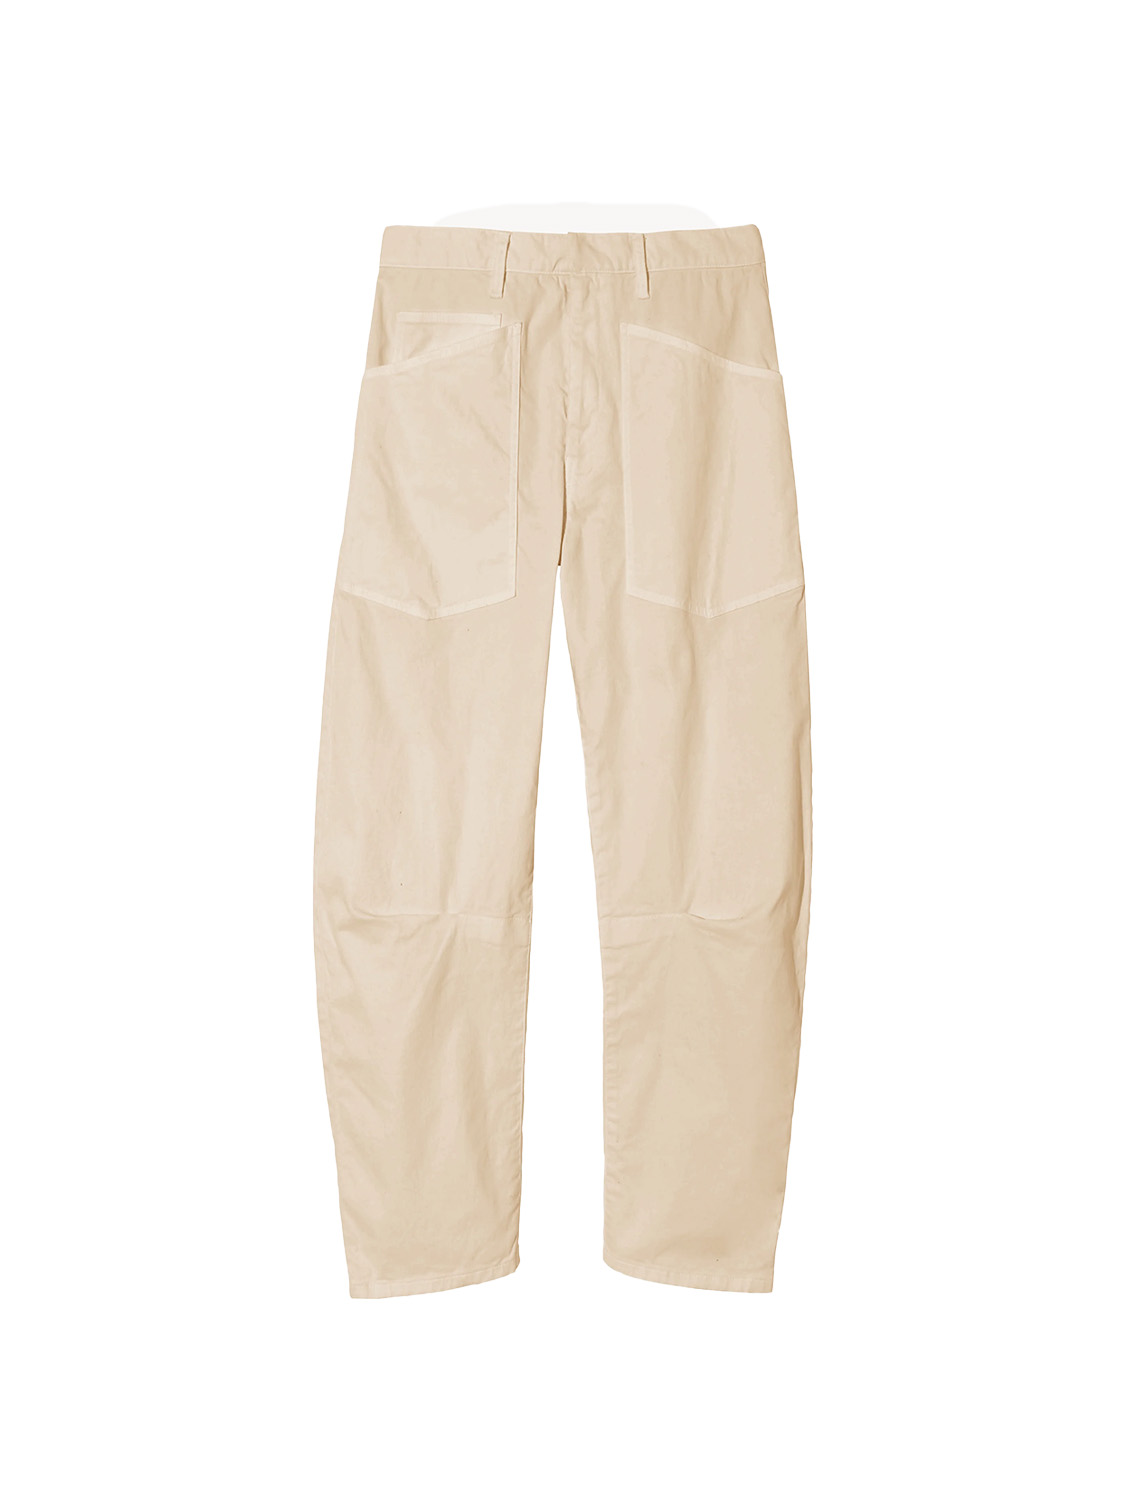 Shon Pant – Stretchy cargo pants made of cotton 